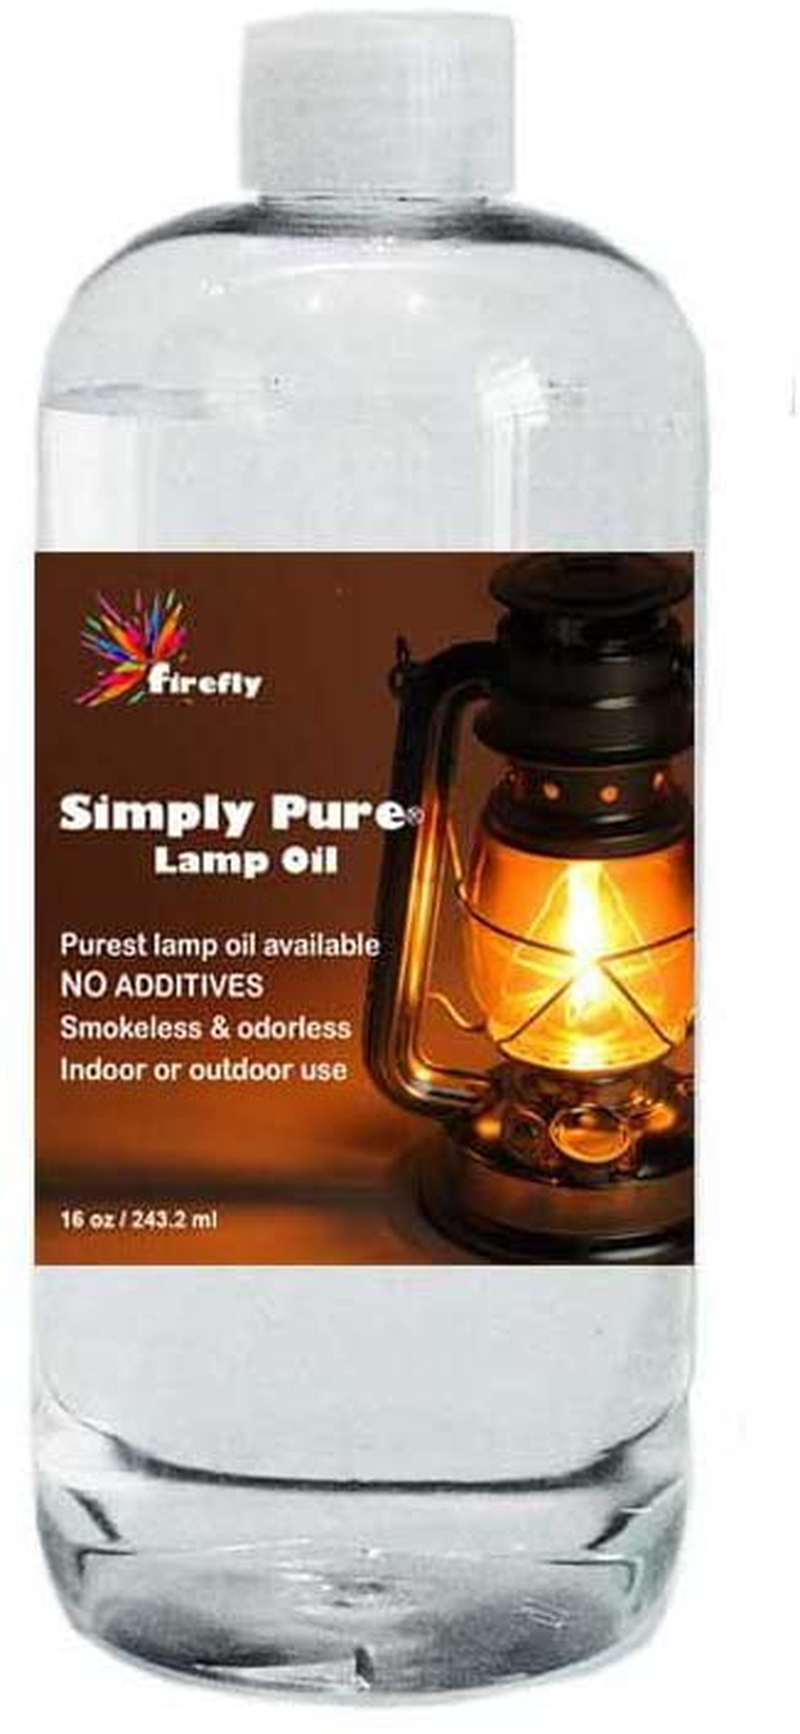 Gift Set - Firefly Zen Petite Refillable Glass Oil Warmer and Candle - Votive Size - Includes 16 Oz Smokeless Odorless Liquid Paraffin Lamp Oil - Easily Change Essential Oils & Home Fragrances Home & Garden > Lighting Accessories > Oil Lamp Fuel Firefly Fuel, Inc.   